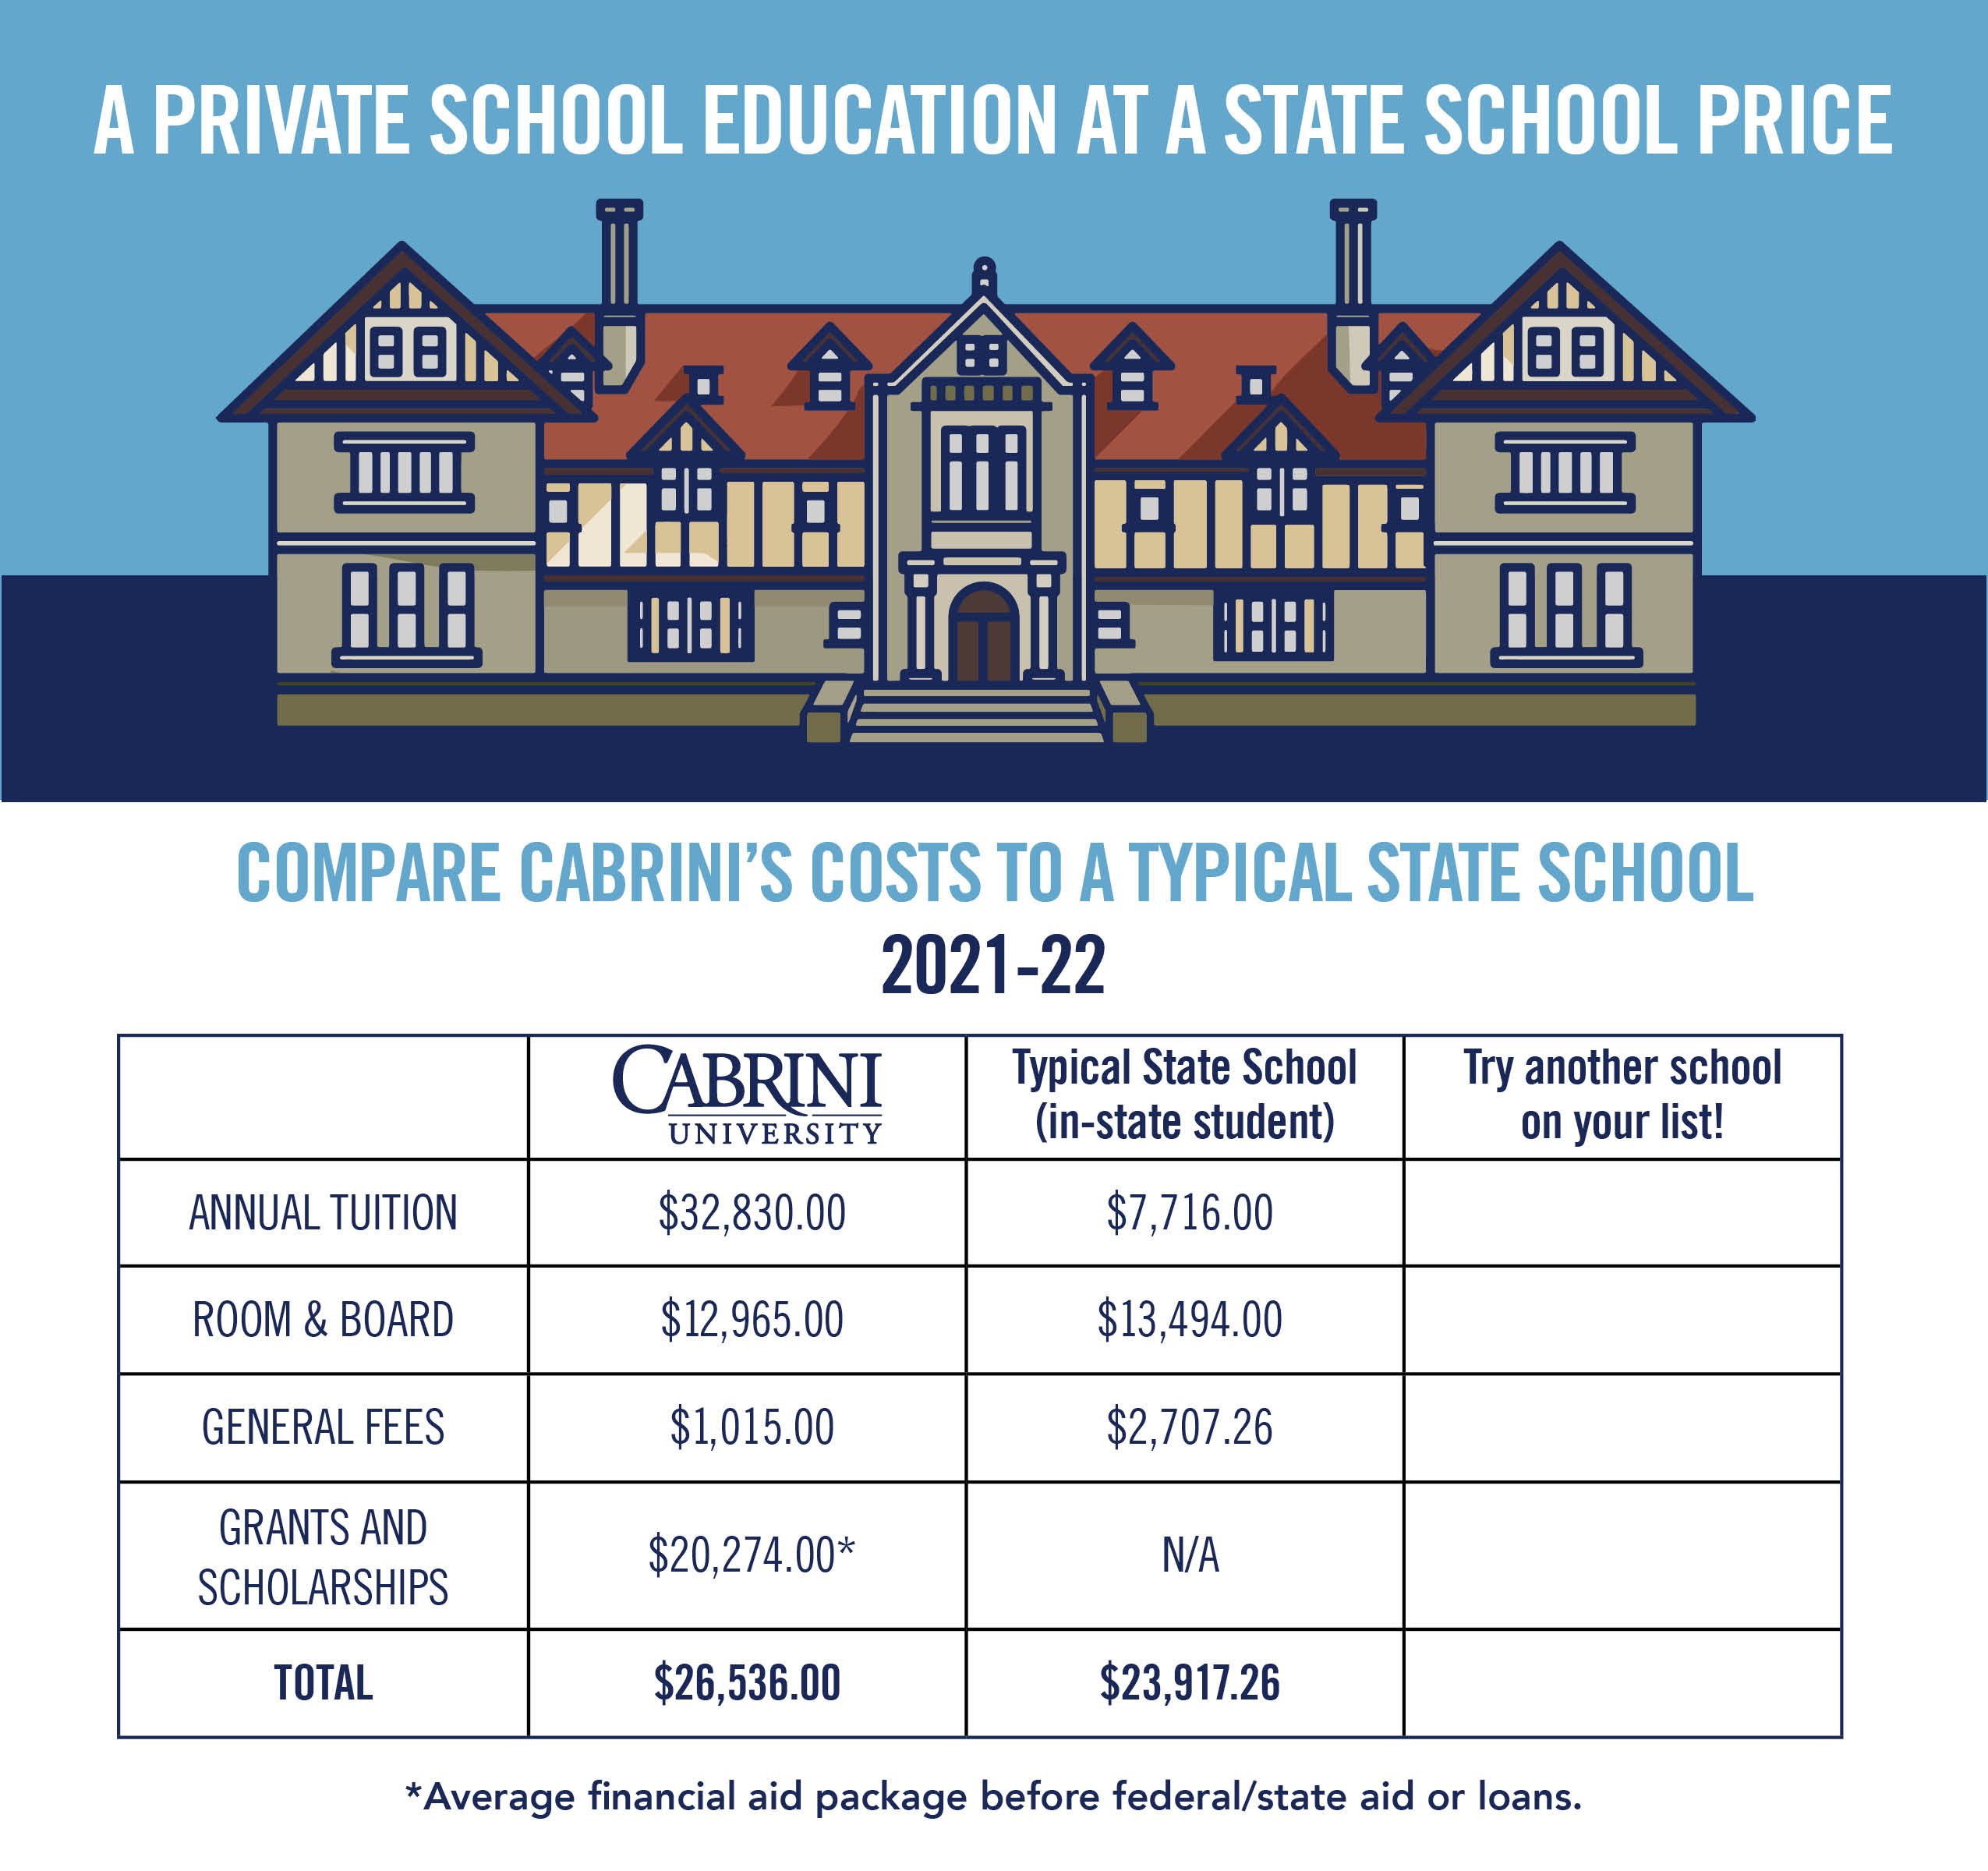 Private school education at a state school price